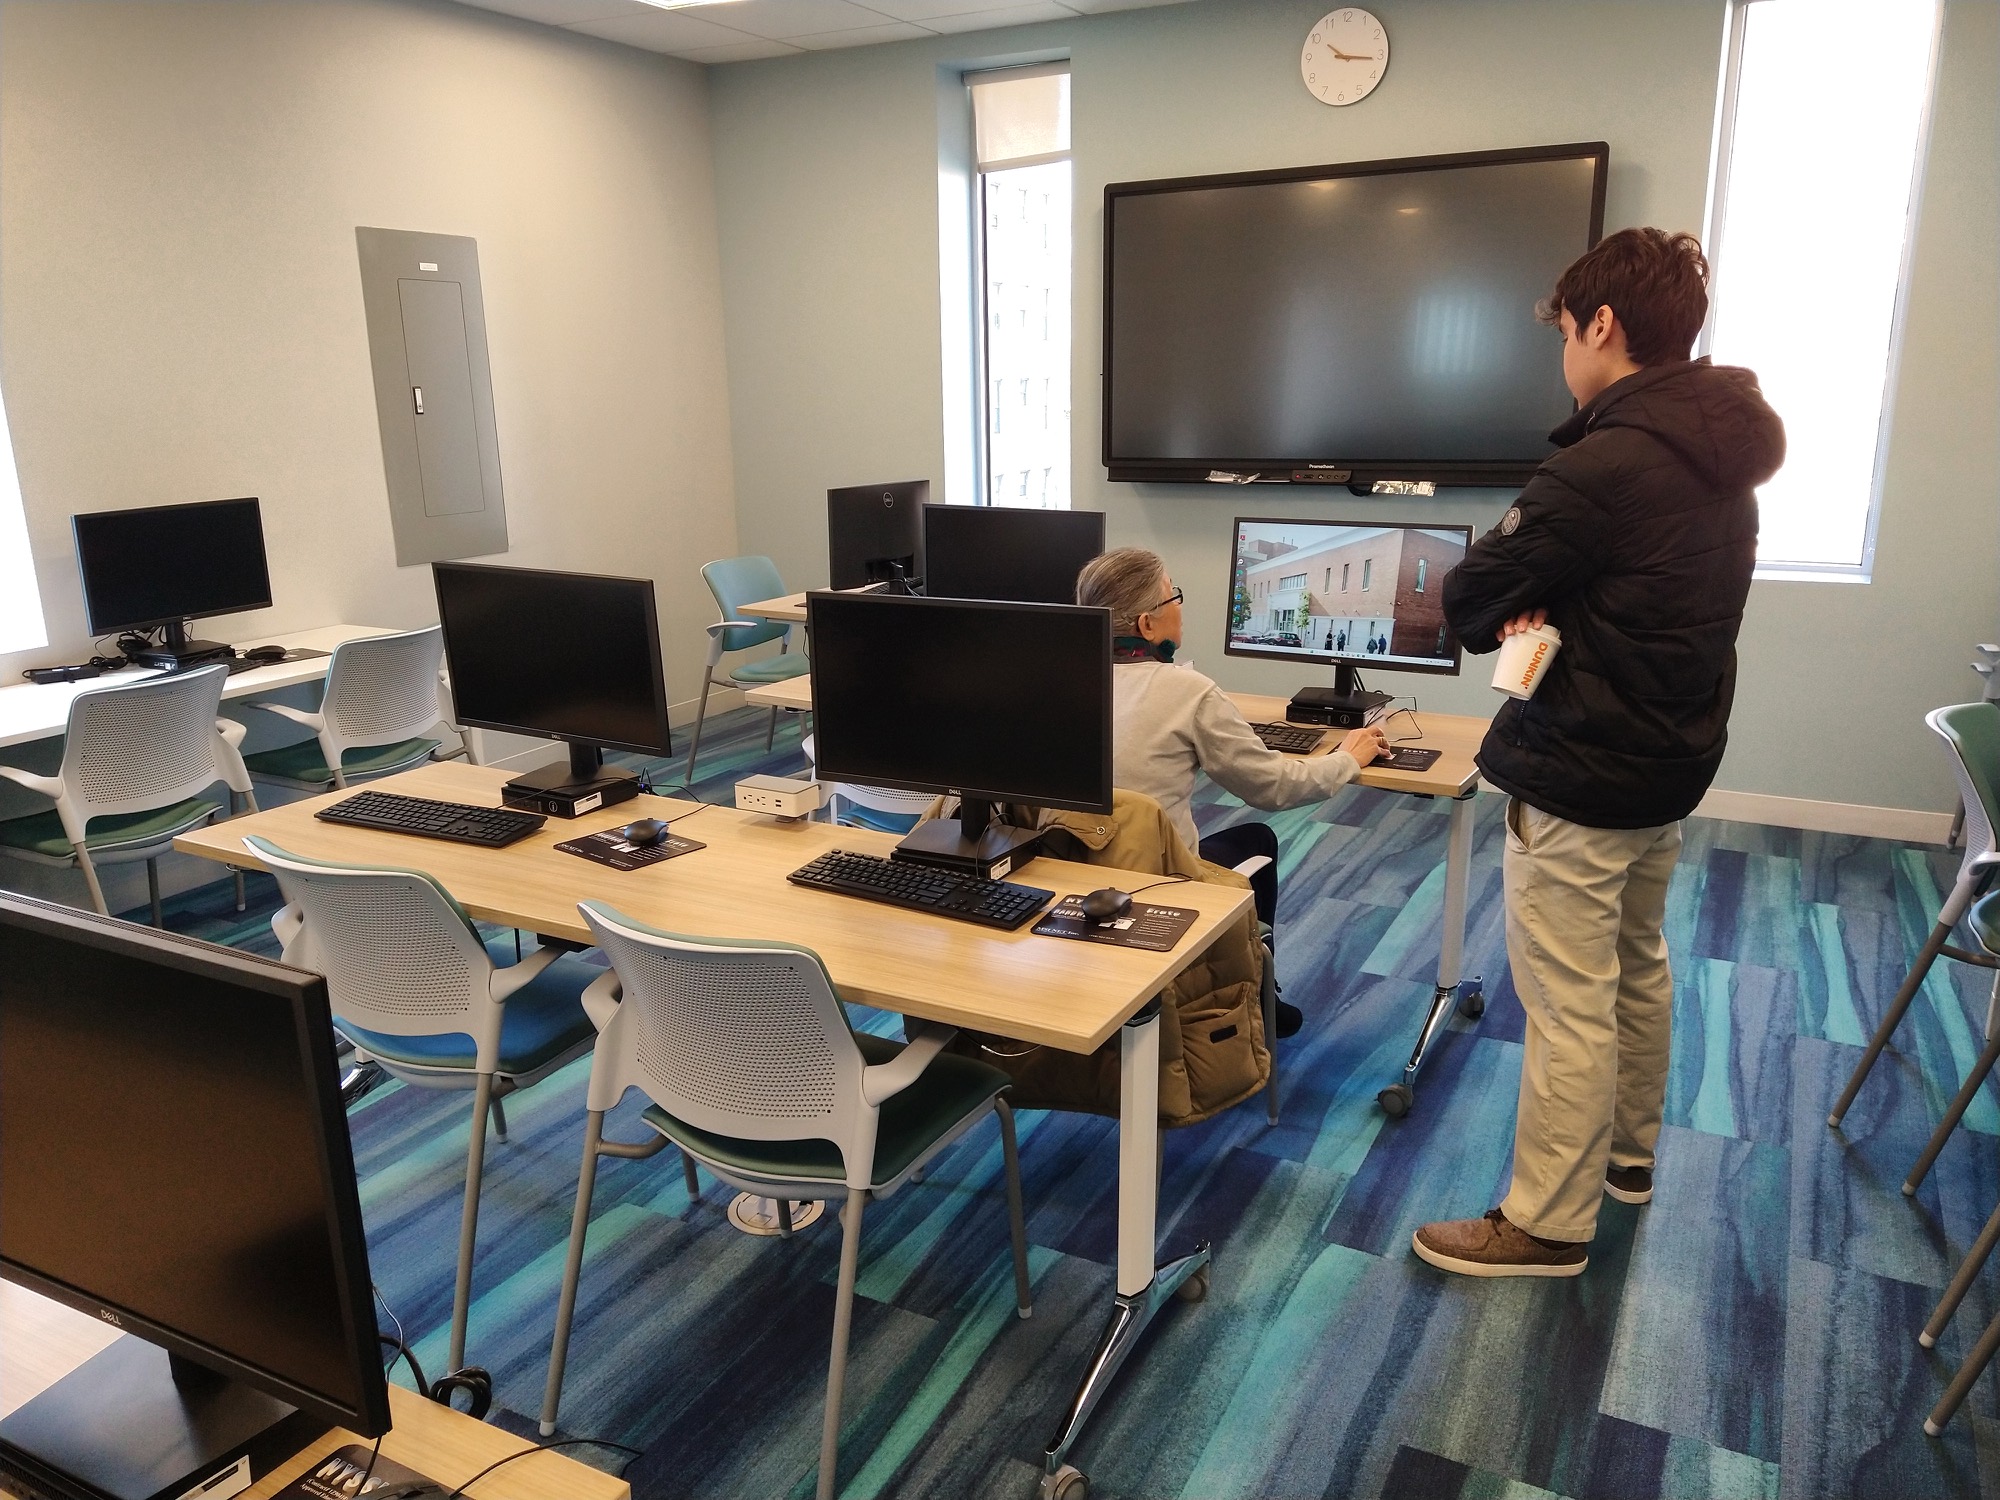 A staff member assisting an older adult in the computer lab at Bay Ridge Center Opening.